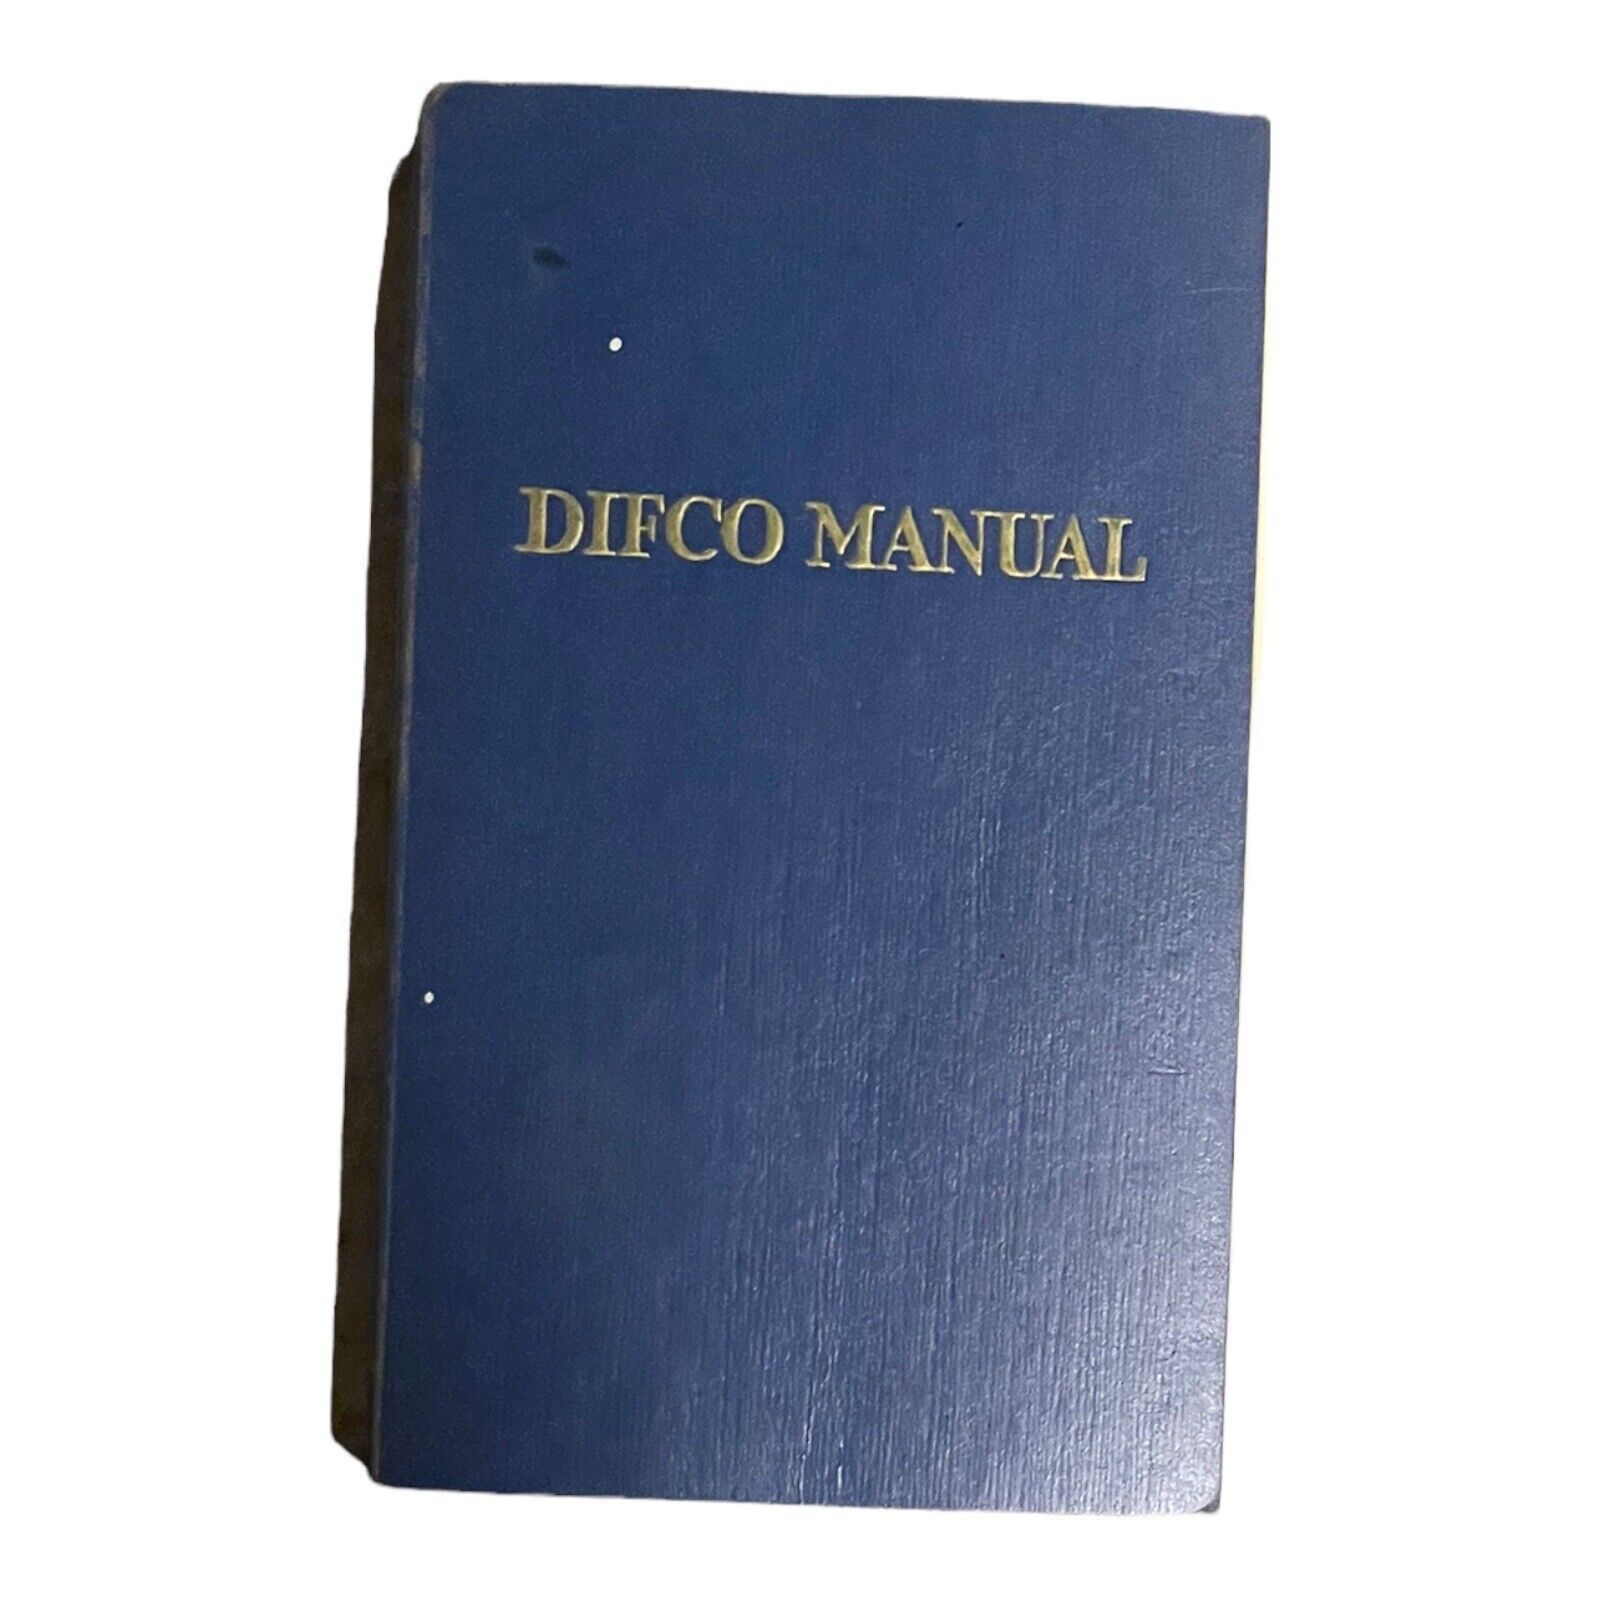 VINTAGE DIFCO MANUAL Seventh Edition 1943 DEHYDRATED CULTURE MEDIA AND REAGENTS